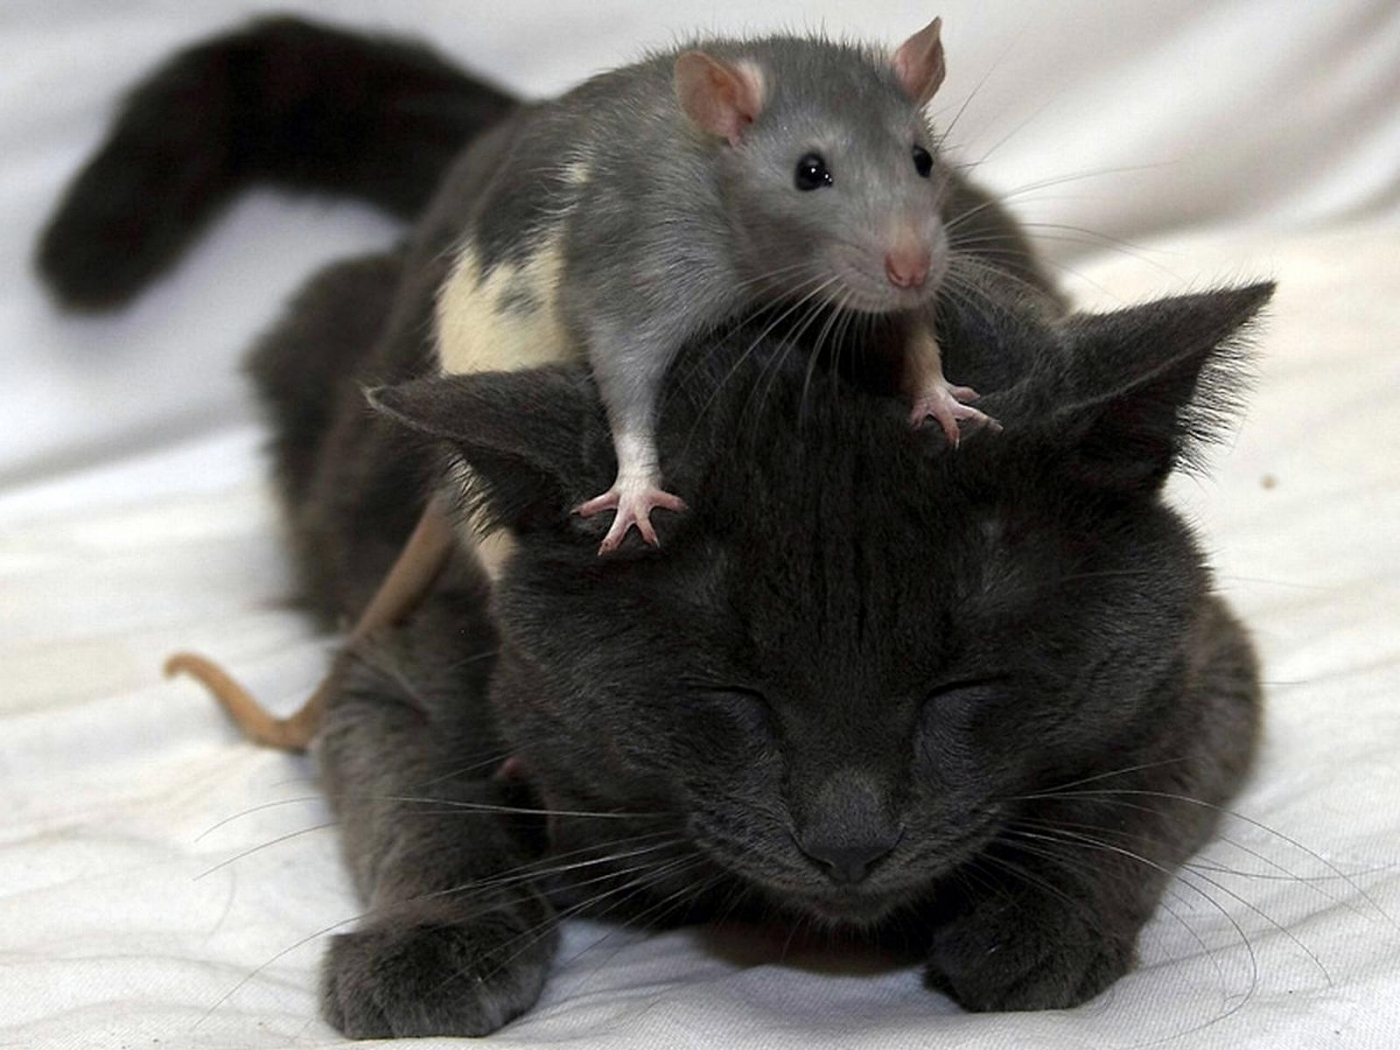 animals, cats, mice, black images